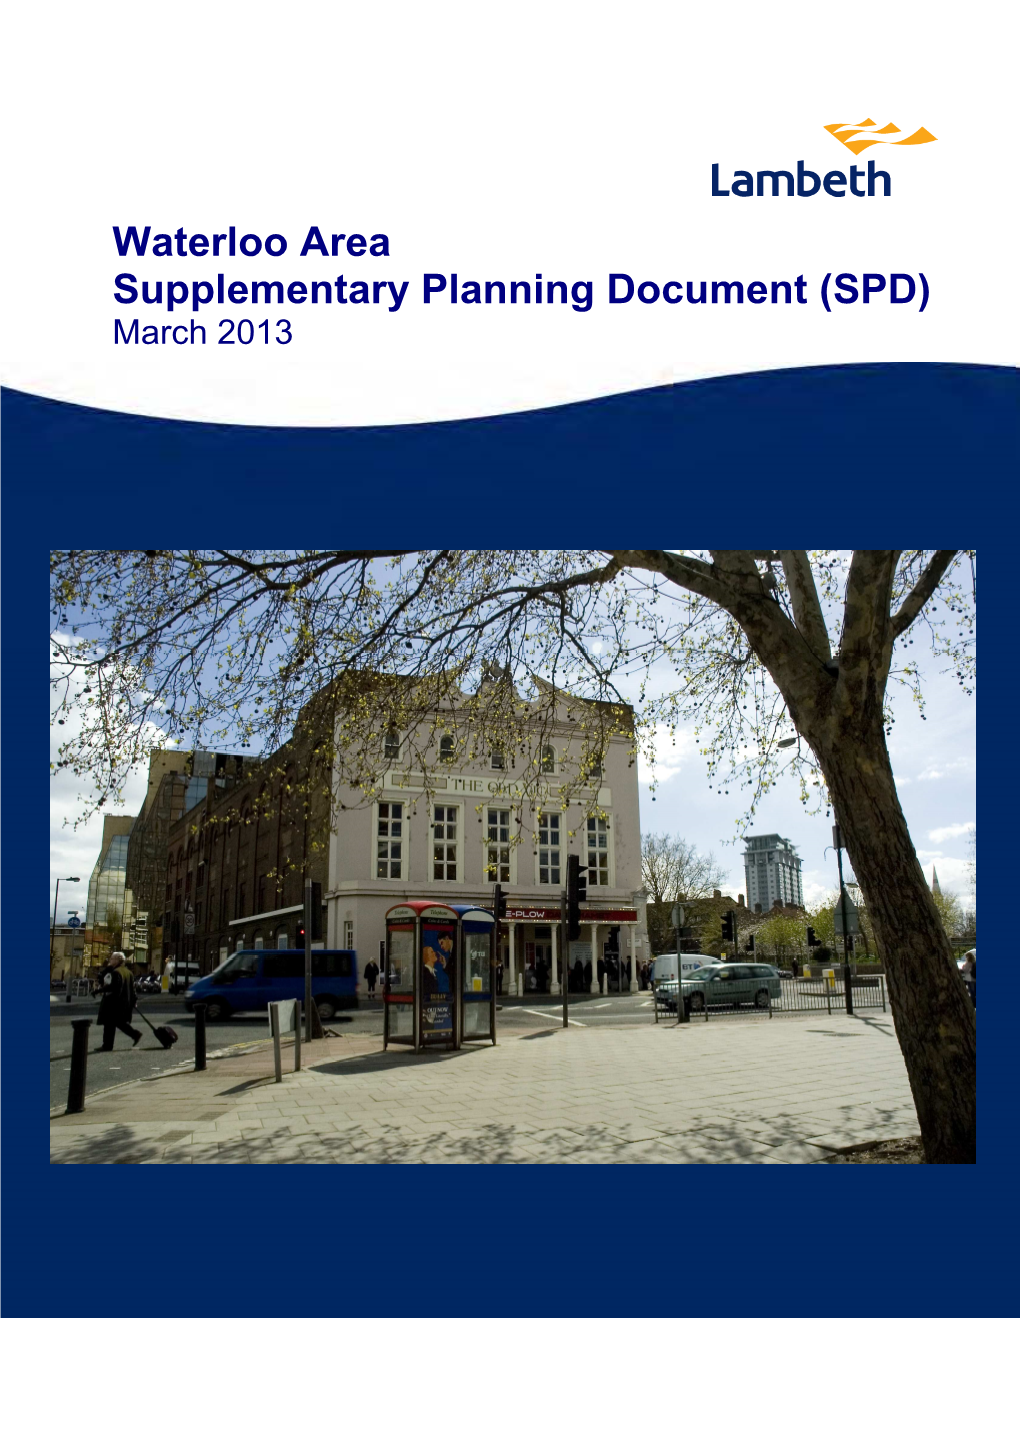 Waterloo Area Supplementary Planning Document (SPD) March 2013